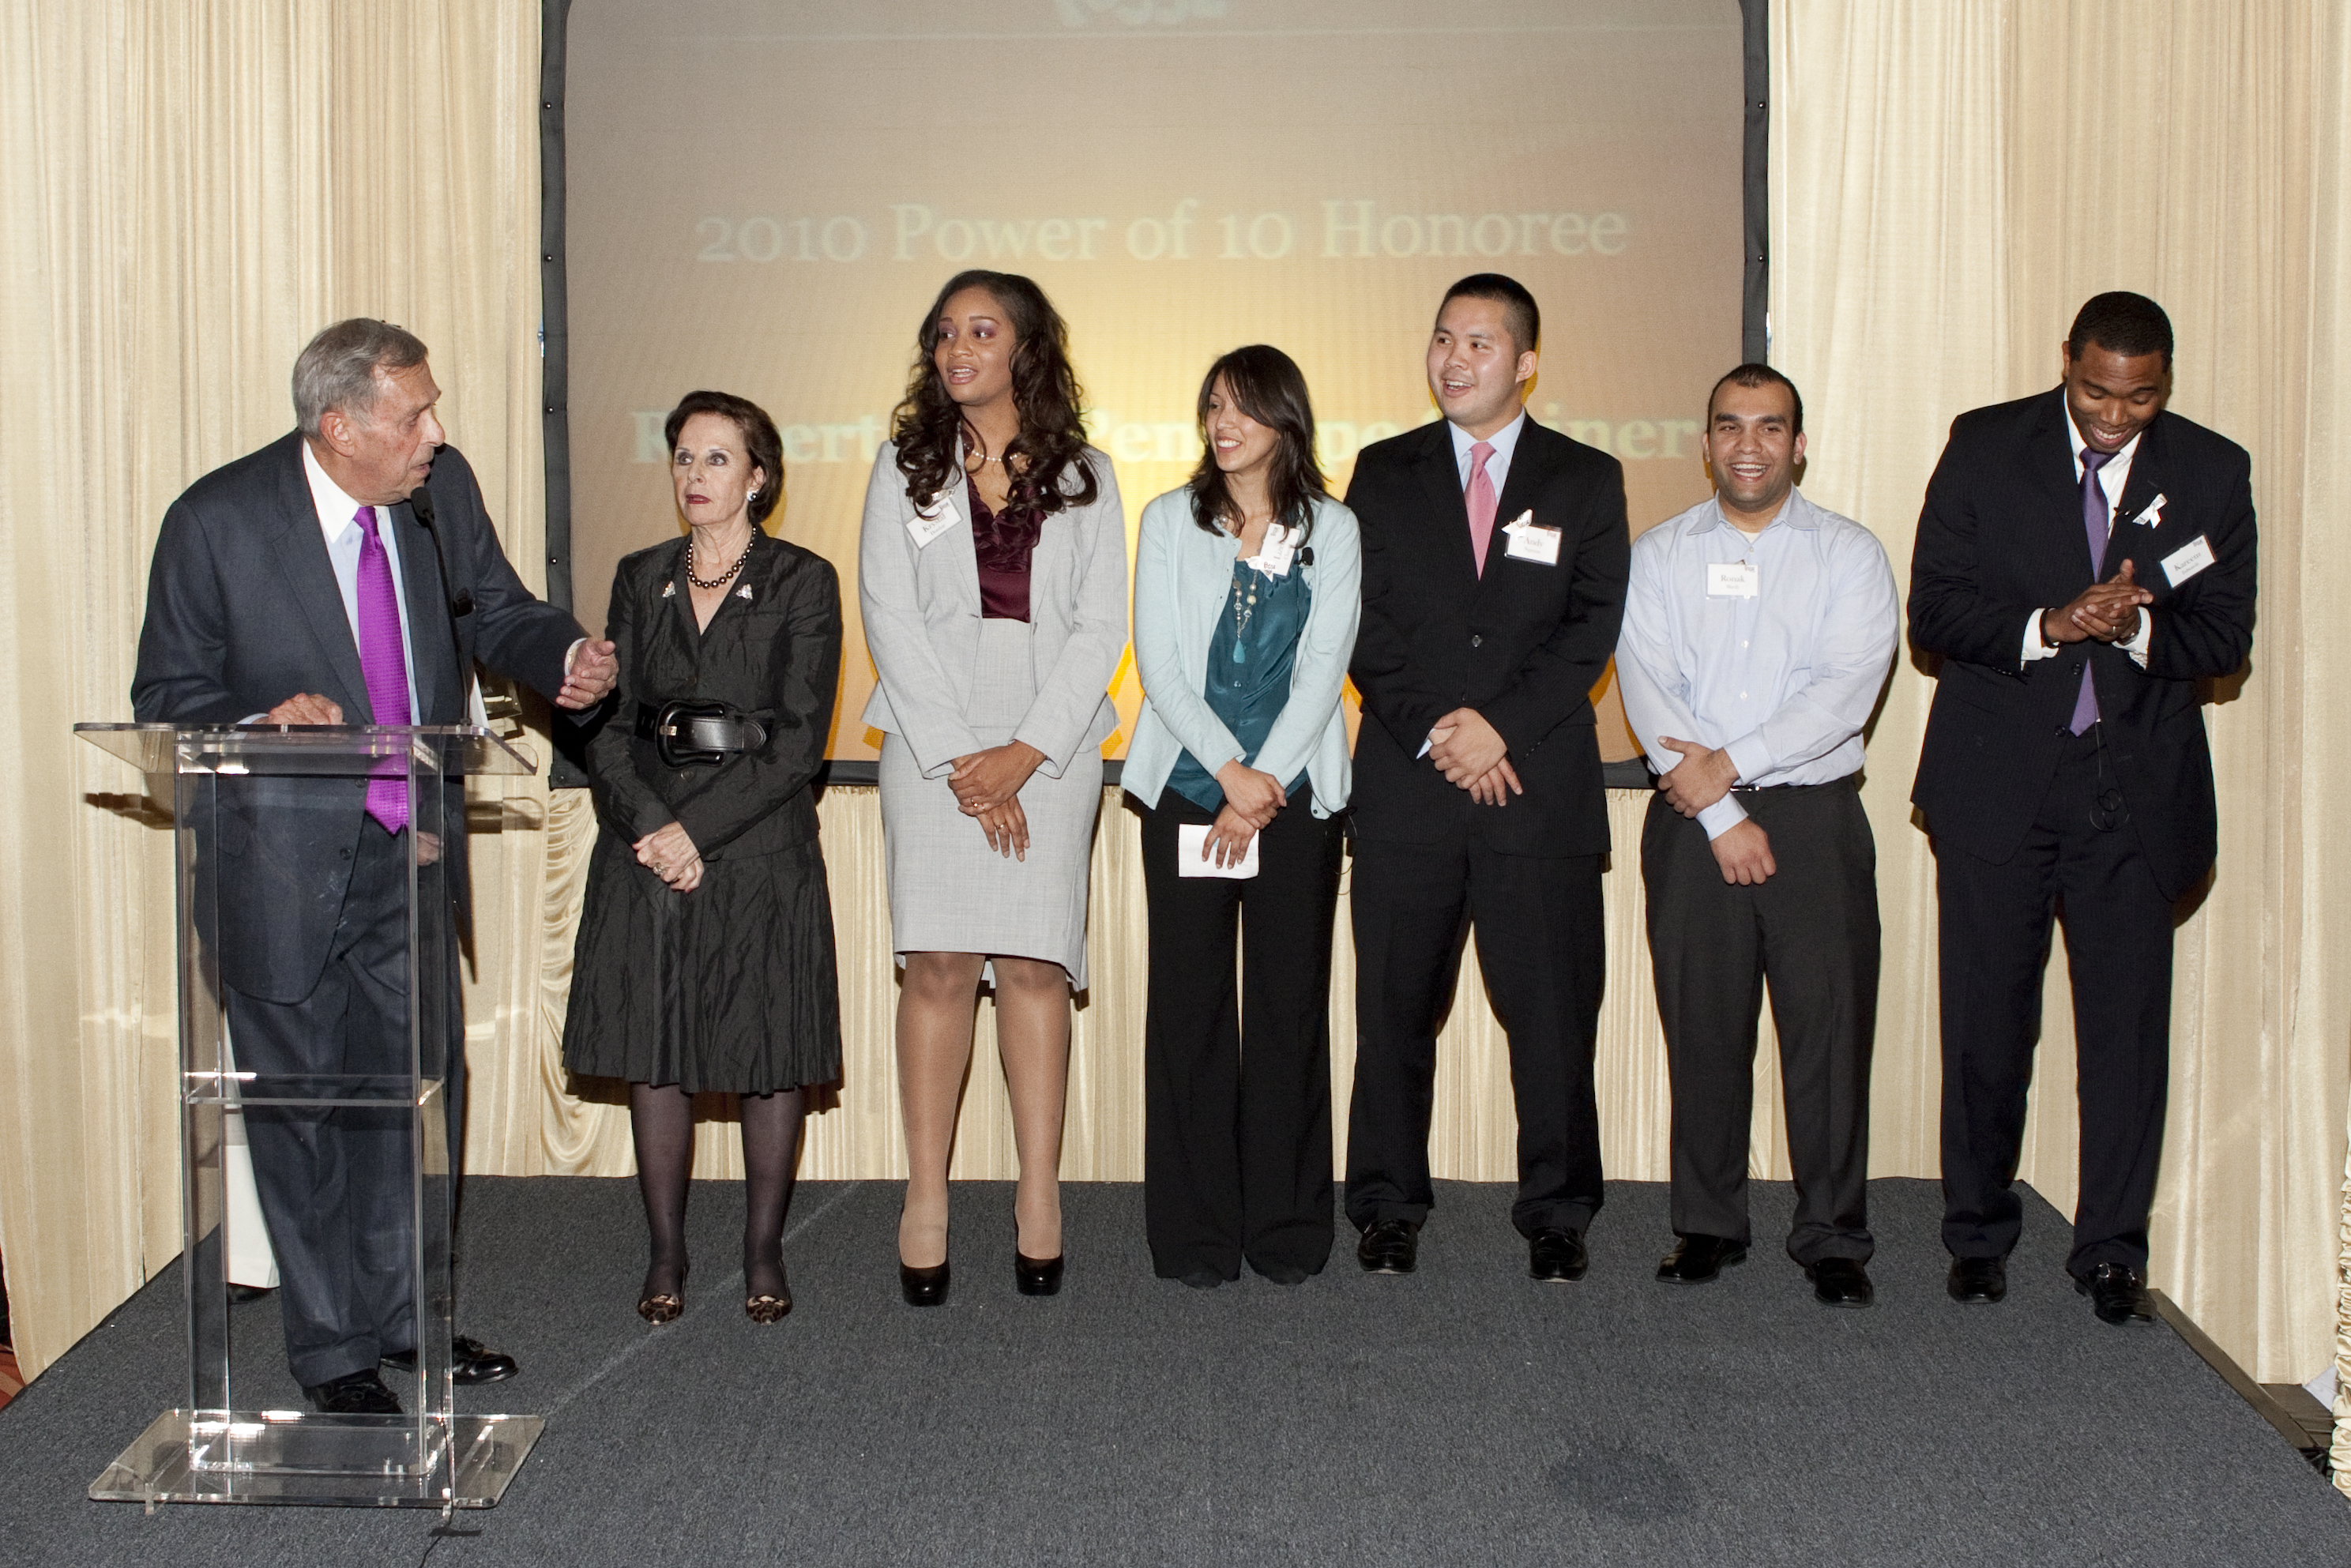 Bob and Penelope Steiner (left) were honored at Posse Chicago's Power of 10 event in 2010. They took the stage with Posse Scholars and alumni, including Andy Nguyen (3rd from right).